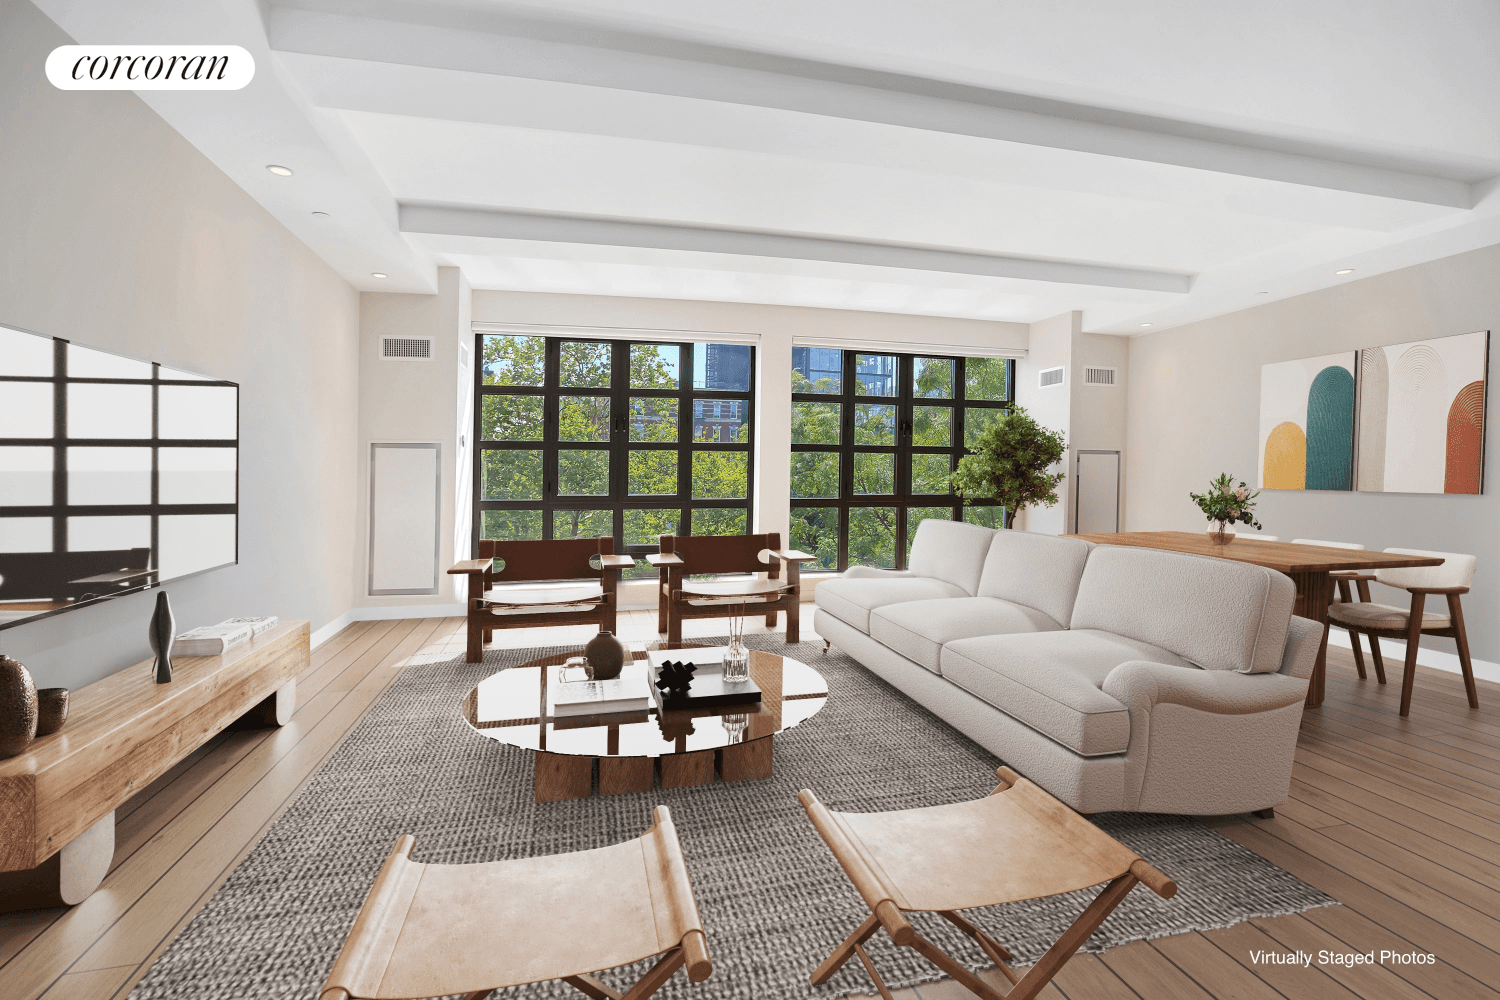 Presenting 64 East 1st Street, Apartment 4 A modern, loft style full floor, two bedroom, two and a half bath home with private outdoor space in the heart of NYC's ...